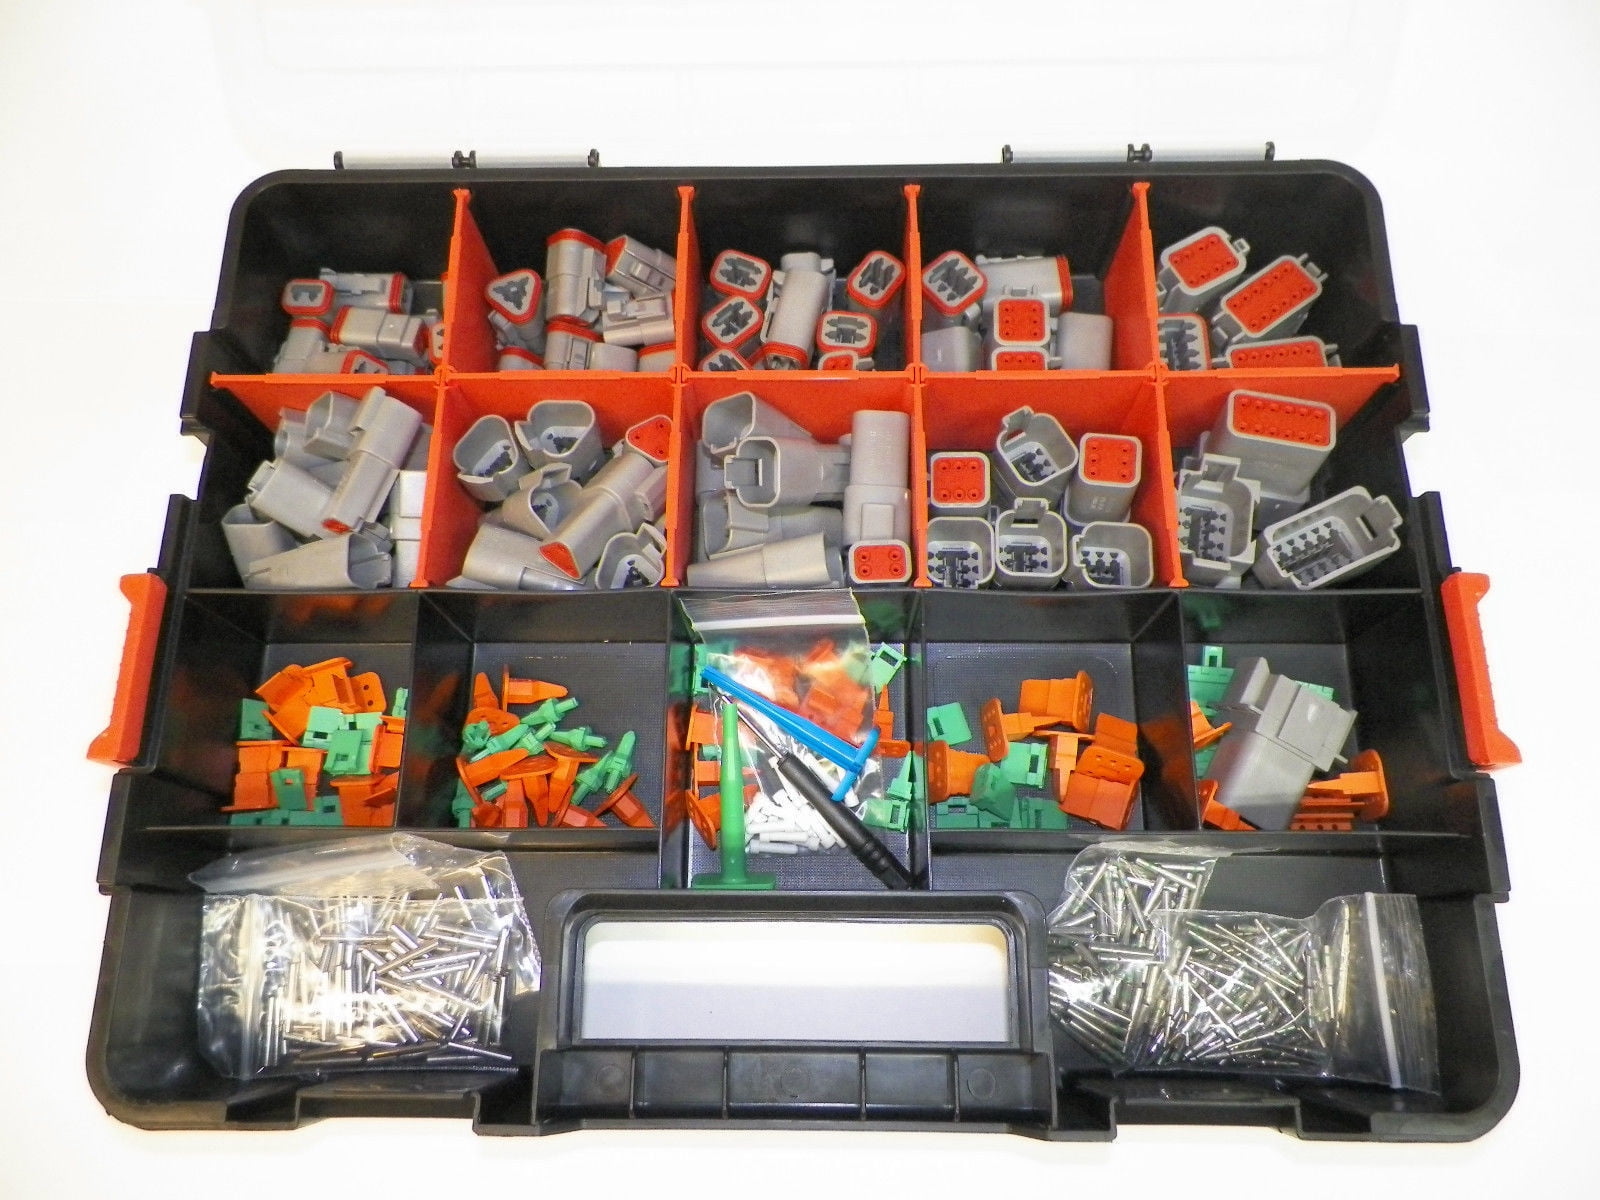 518 PC USA GRAY OEM DEUTSCH DT CONNECTOR KIT SOLID TERMINALS 14-16 FREE dtrt-1 